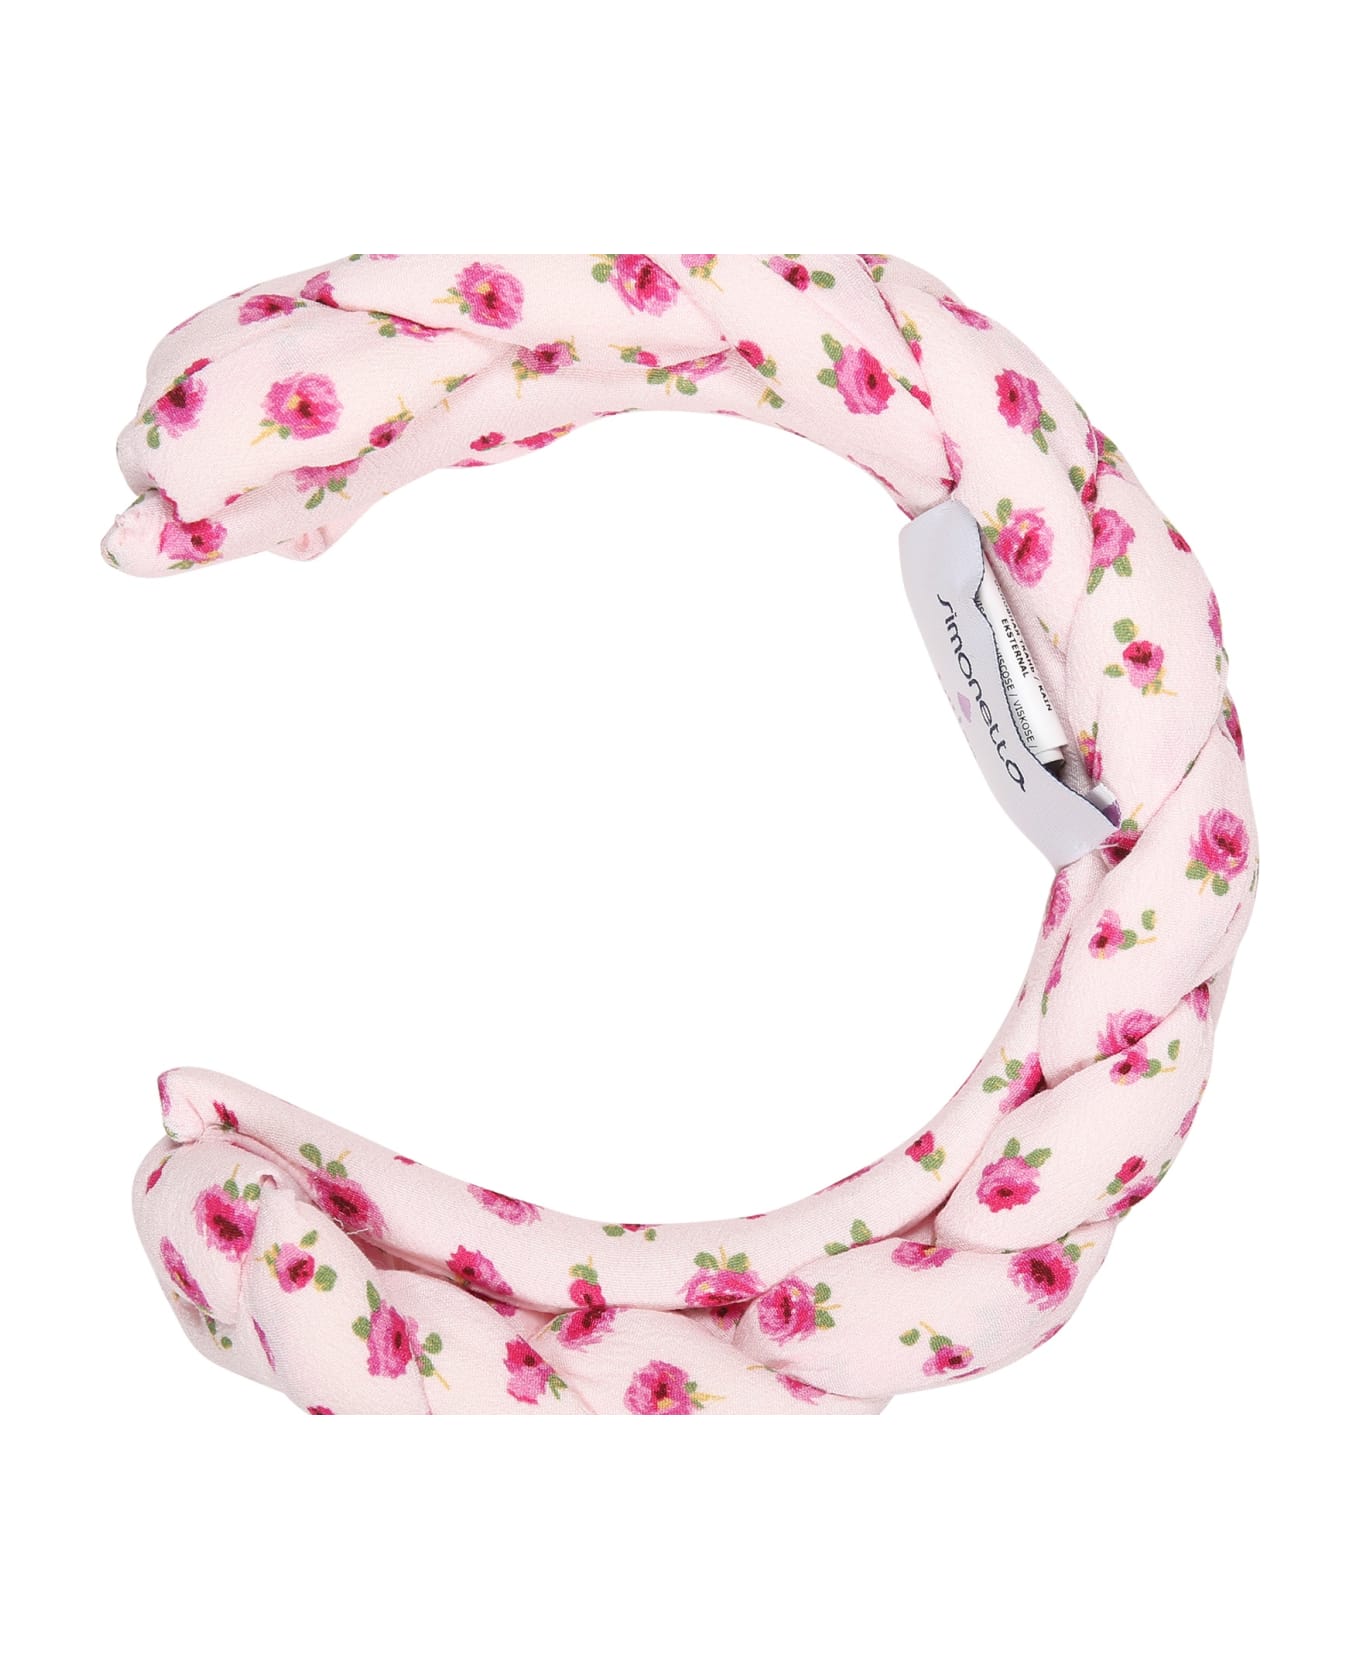 Simonetta Pink Headband For Girl With Floral Print - Pink